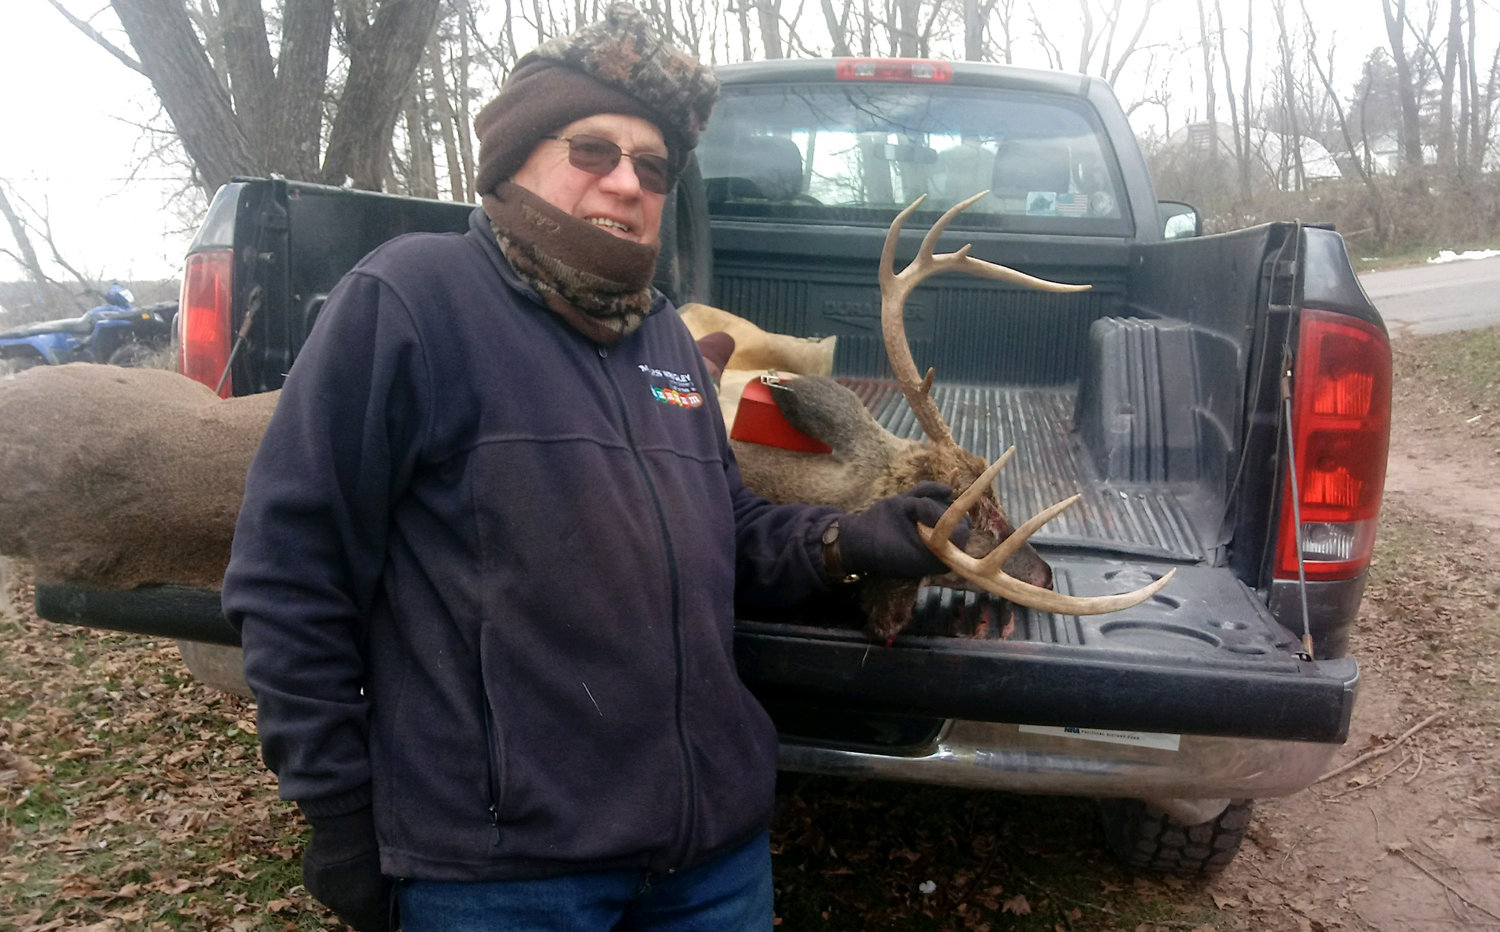 James Meyers of Narrowsburg bagged a 9-pointer on opening day that weighed an astonishing 190 lbs dressed. The buck scored a 70.75 with a left beam of 21 inches, a right beam of 19 3/4 inches and an outside spread of 21 inches. The buck won the Heavy Deer Contest.